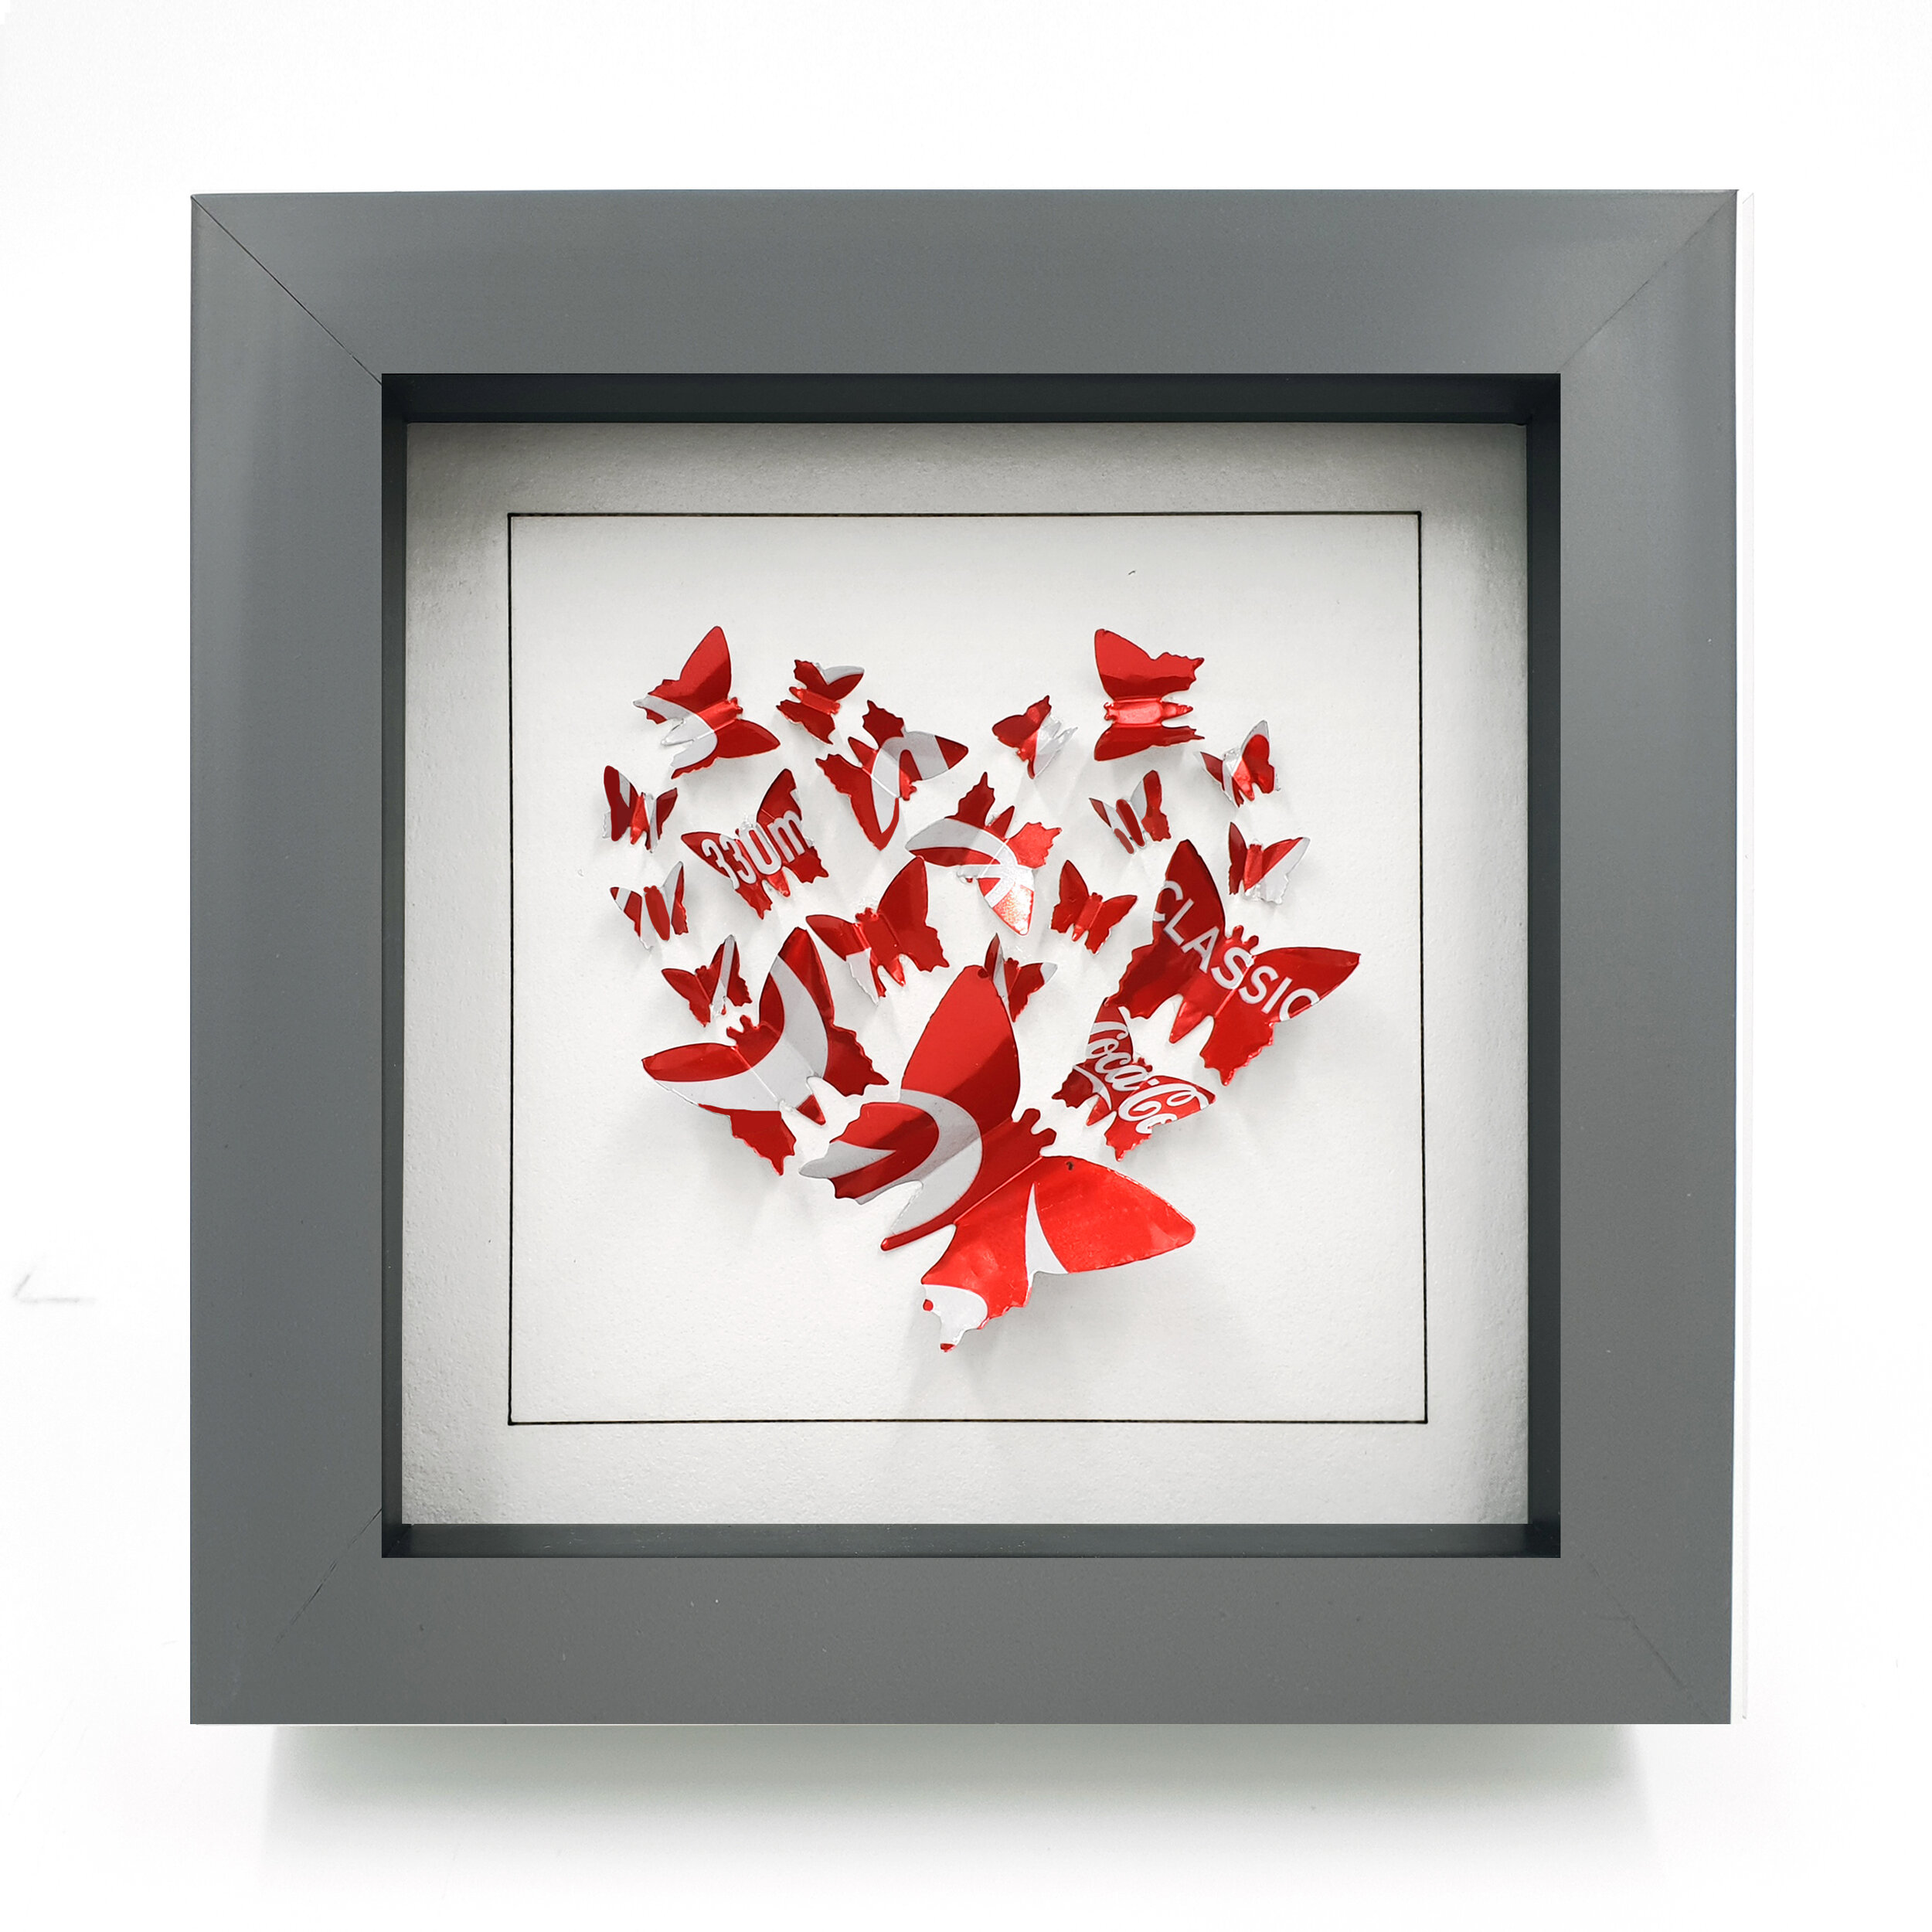 Coca-Cola red and white butterfly heart framed design grey frame